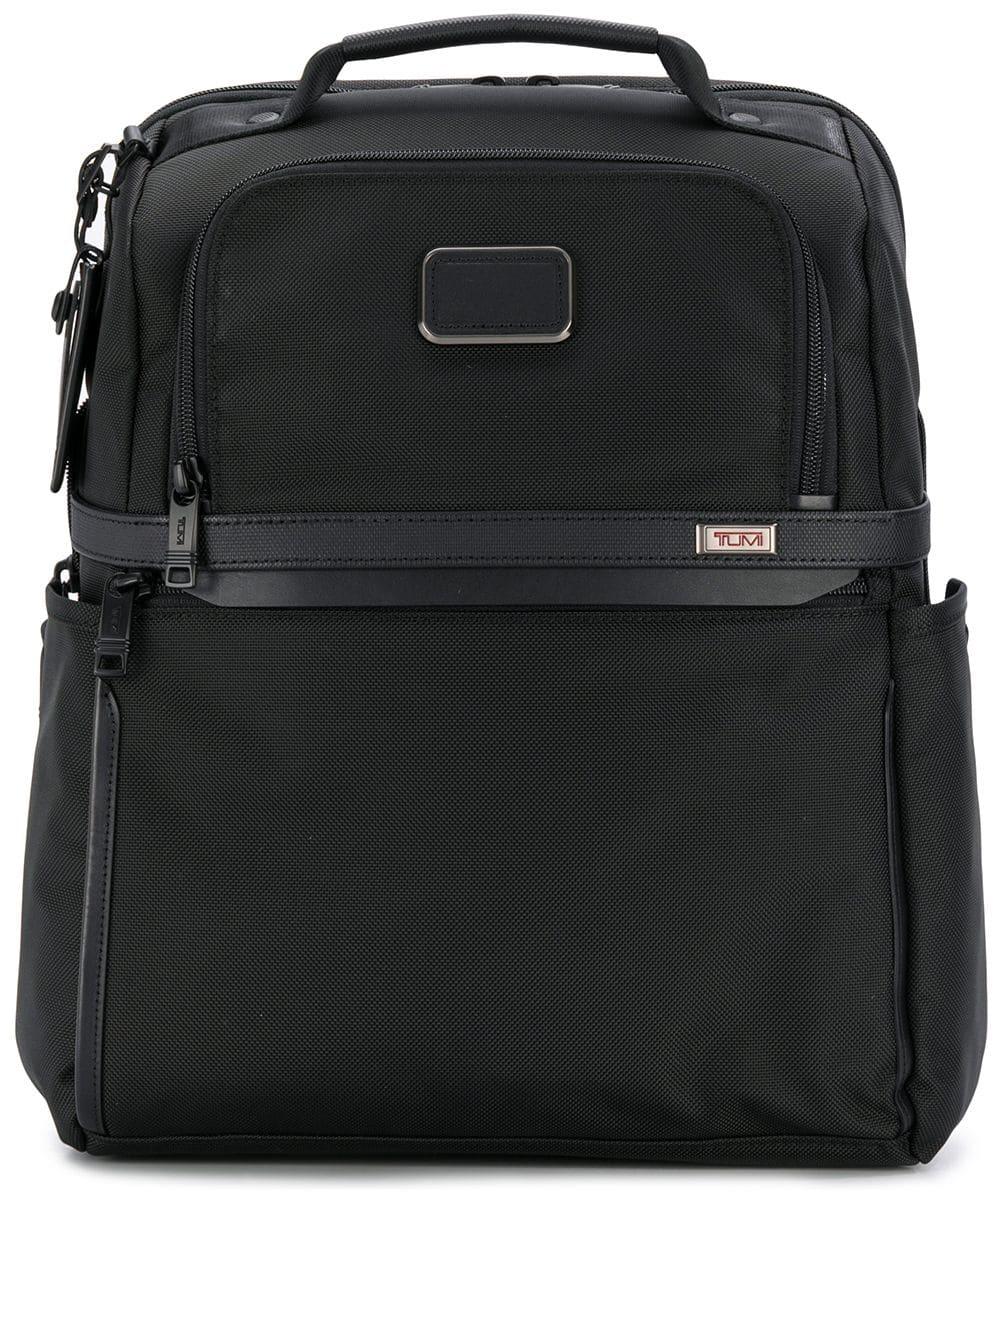 Tumi Slim Solutions Brief Backpack in Black for Men - Lyst